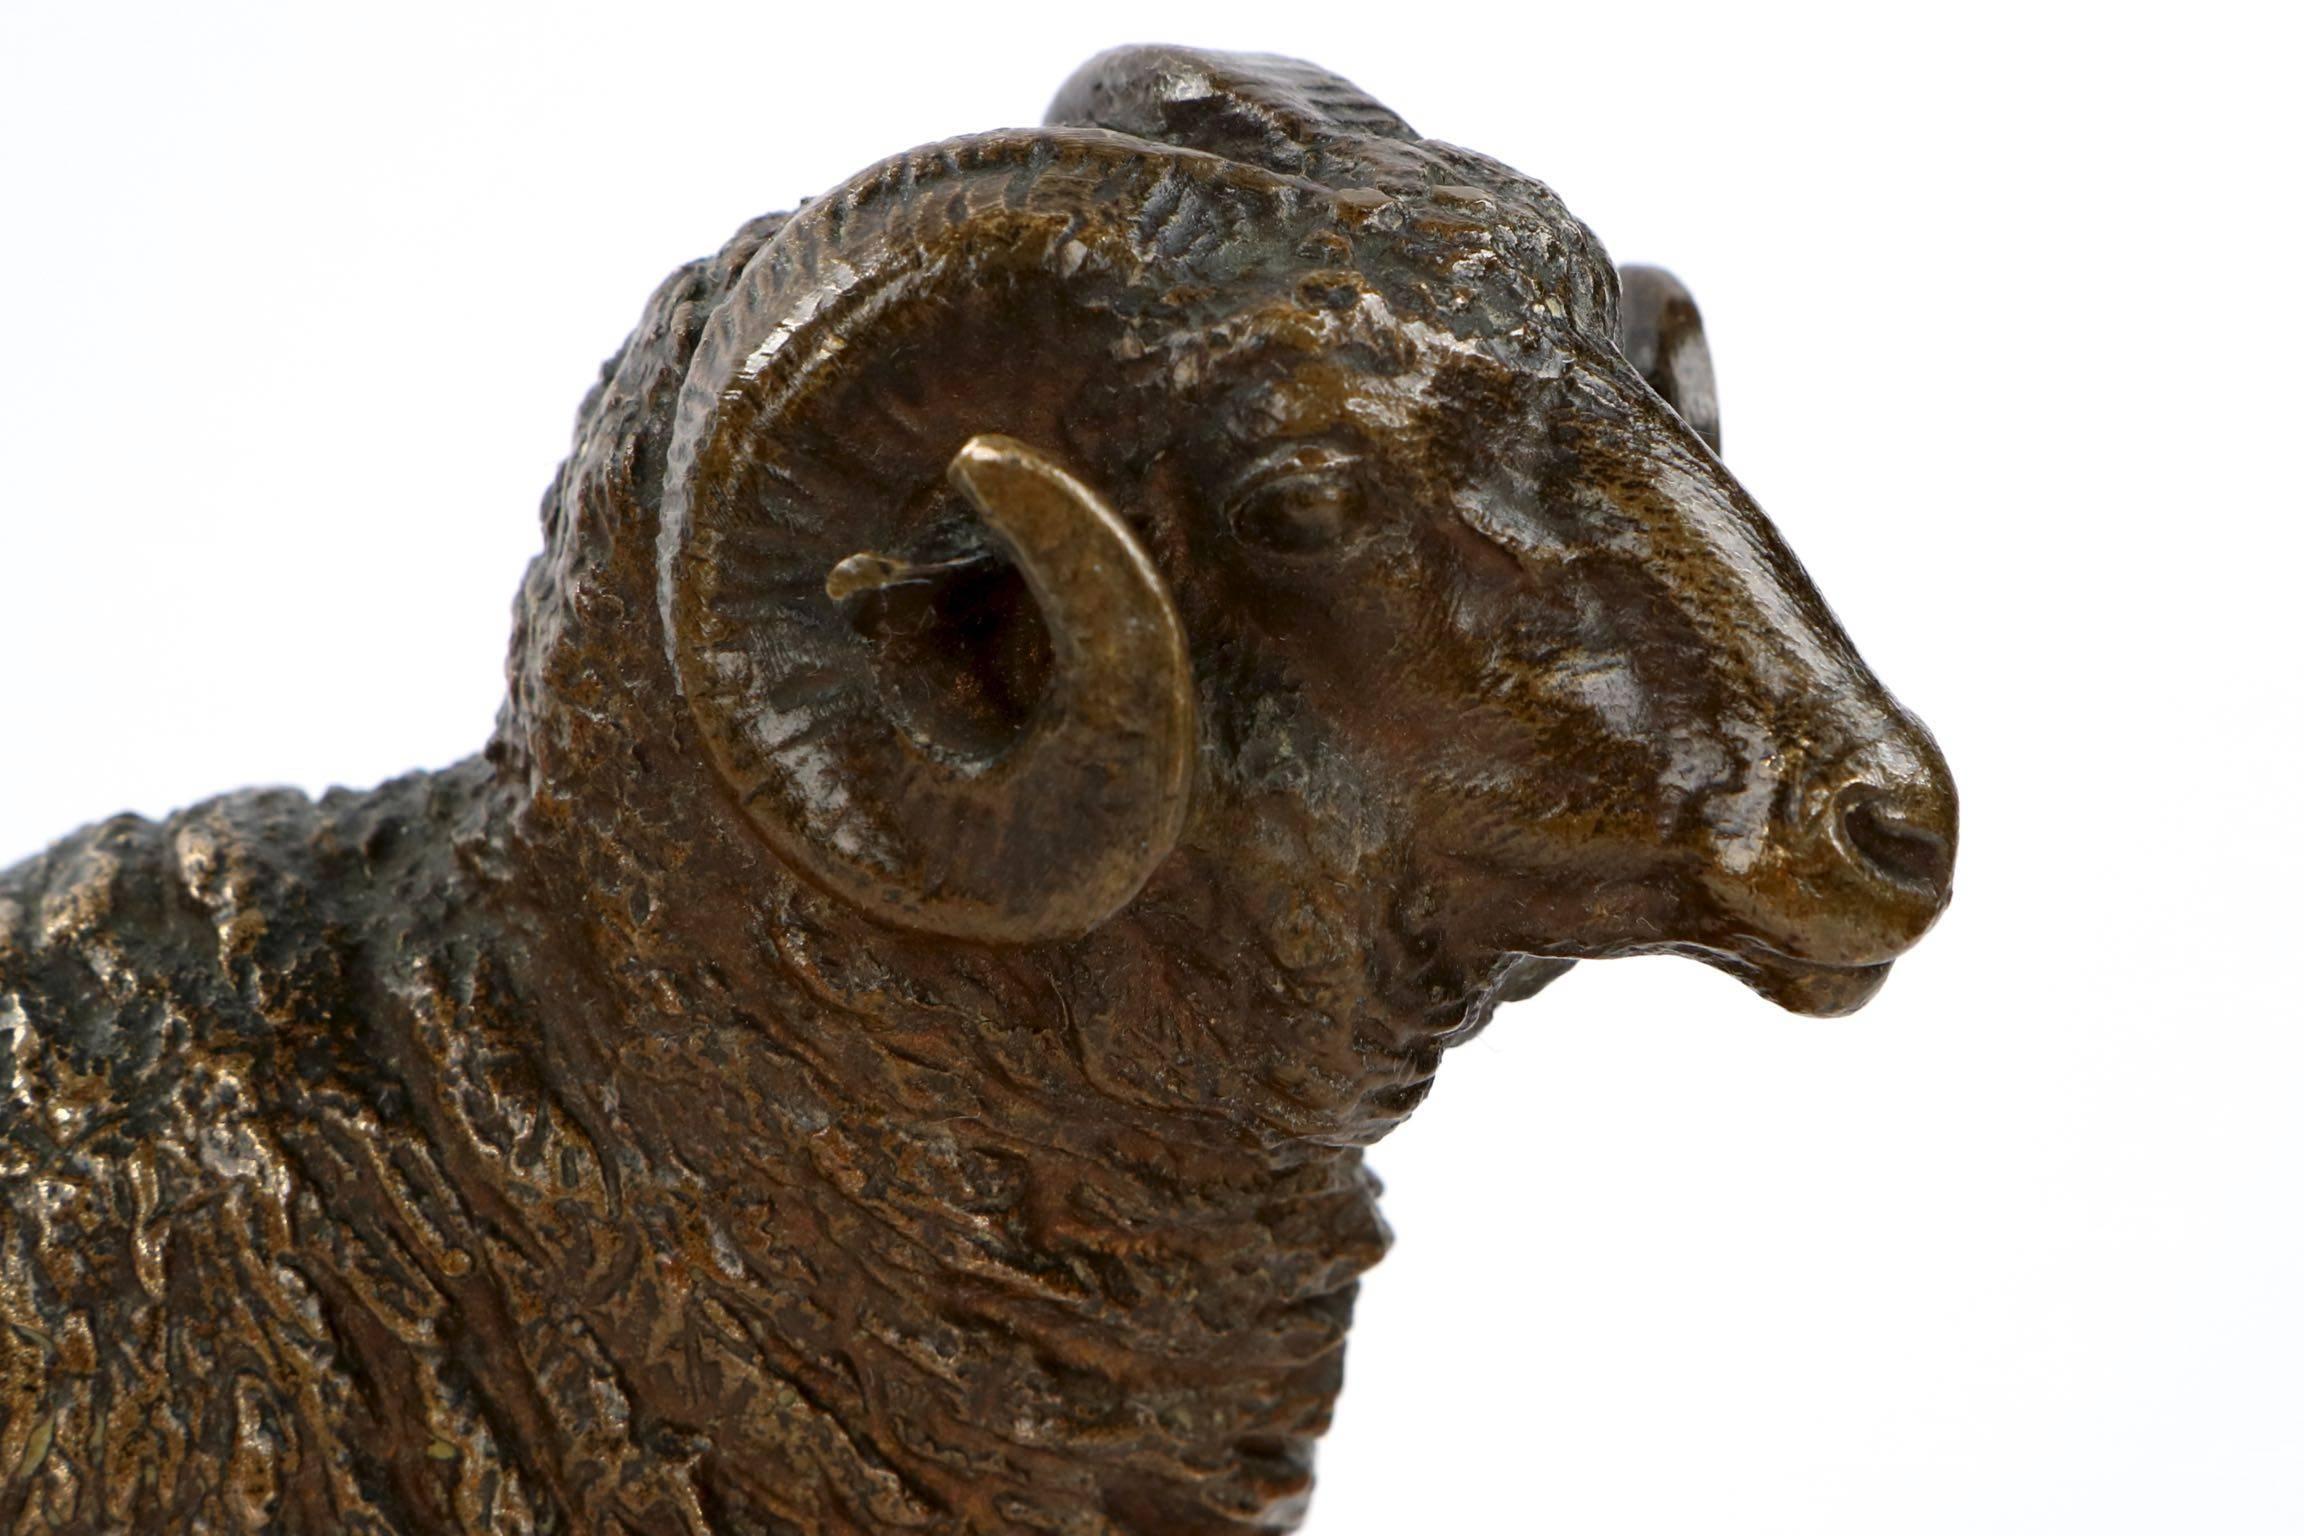 Late 19th Century Antique Bronze Sculpture of Ram by Isidore Bonheur & Peyrol Foundry, circa 1870